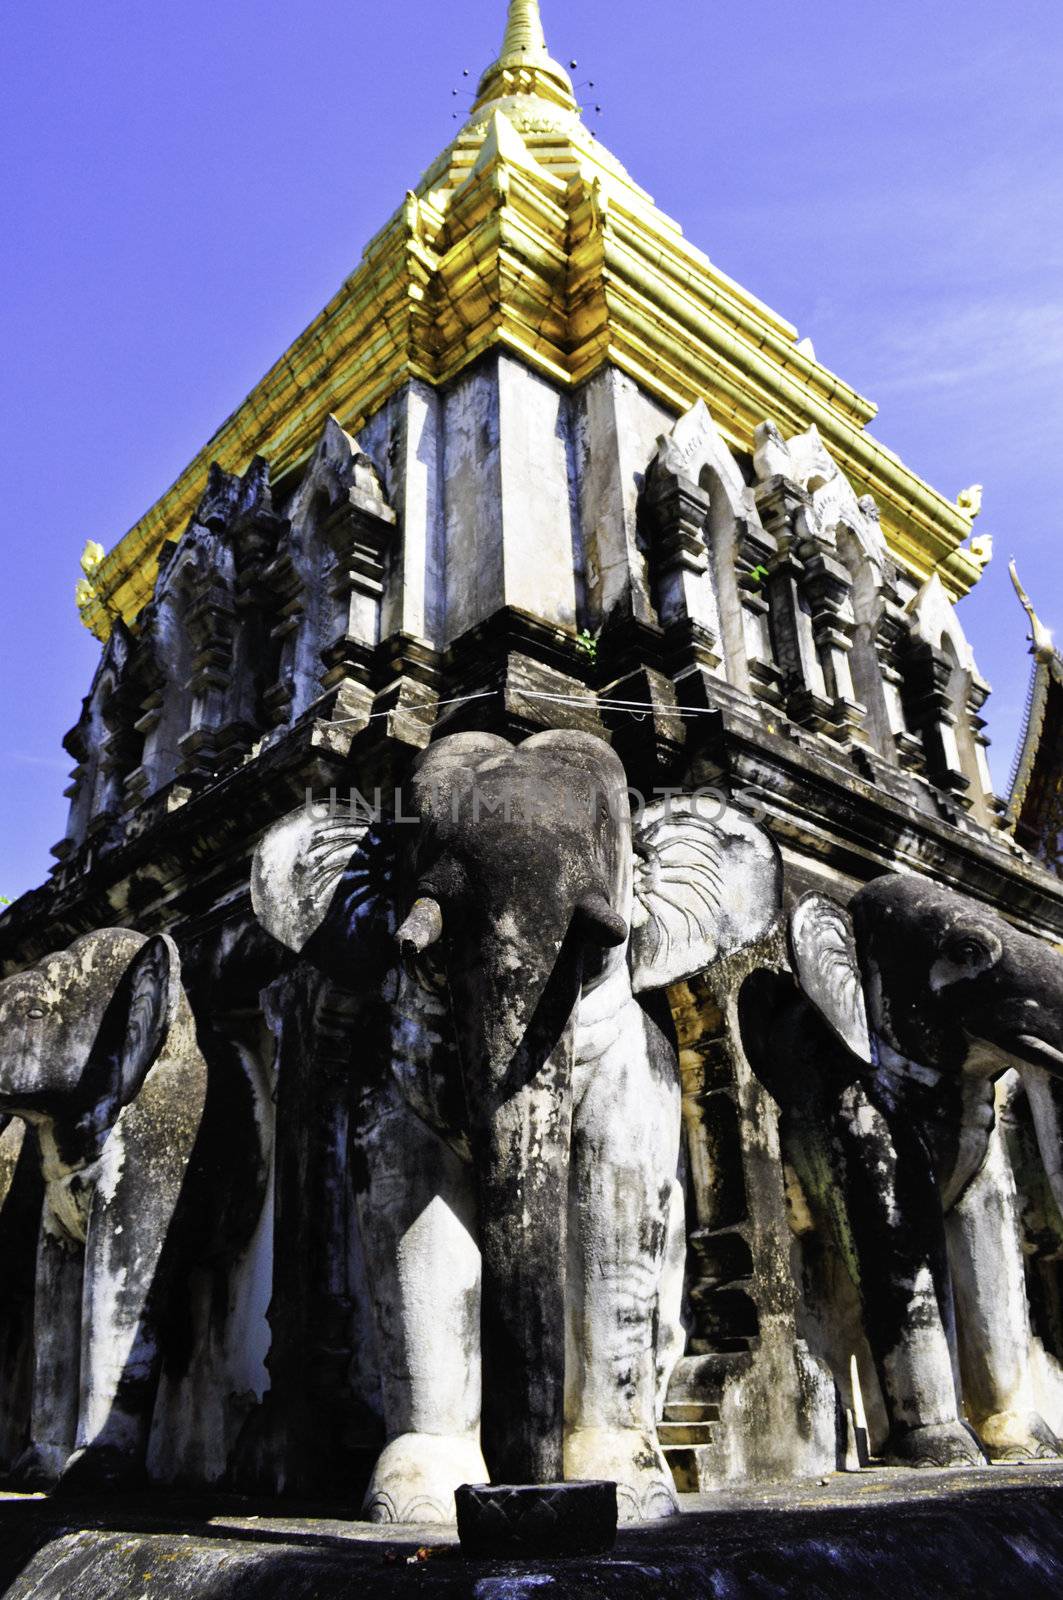 Thai Temple with Stone Elephants by elemery